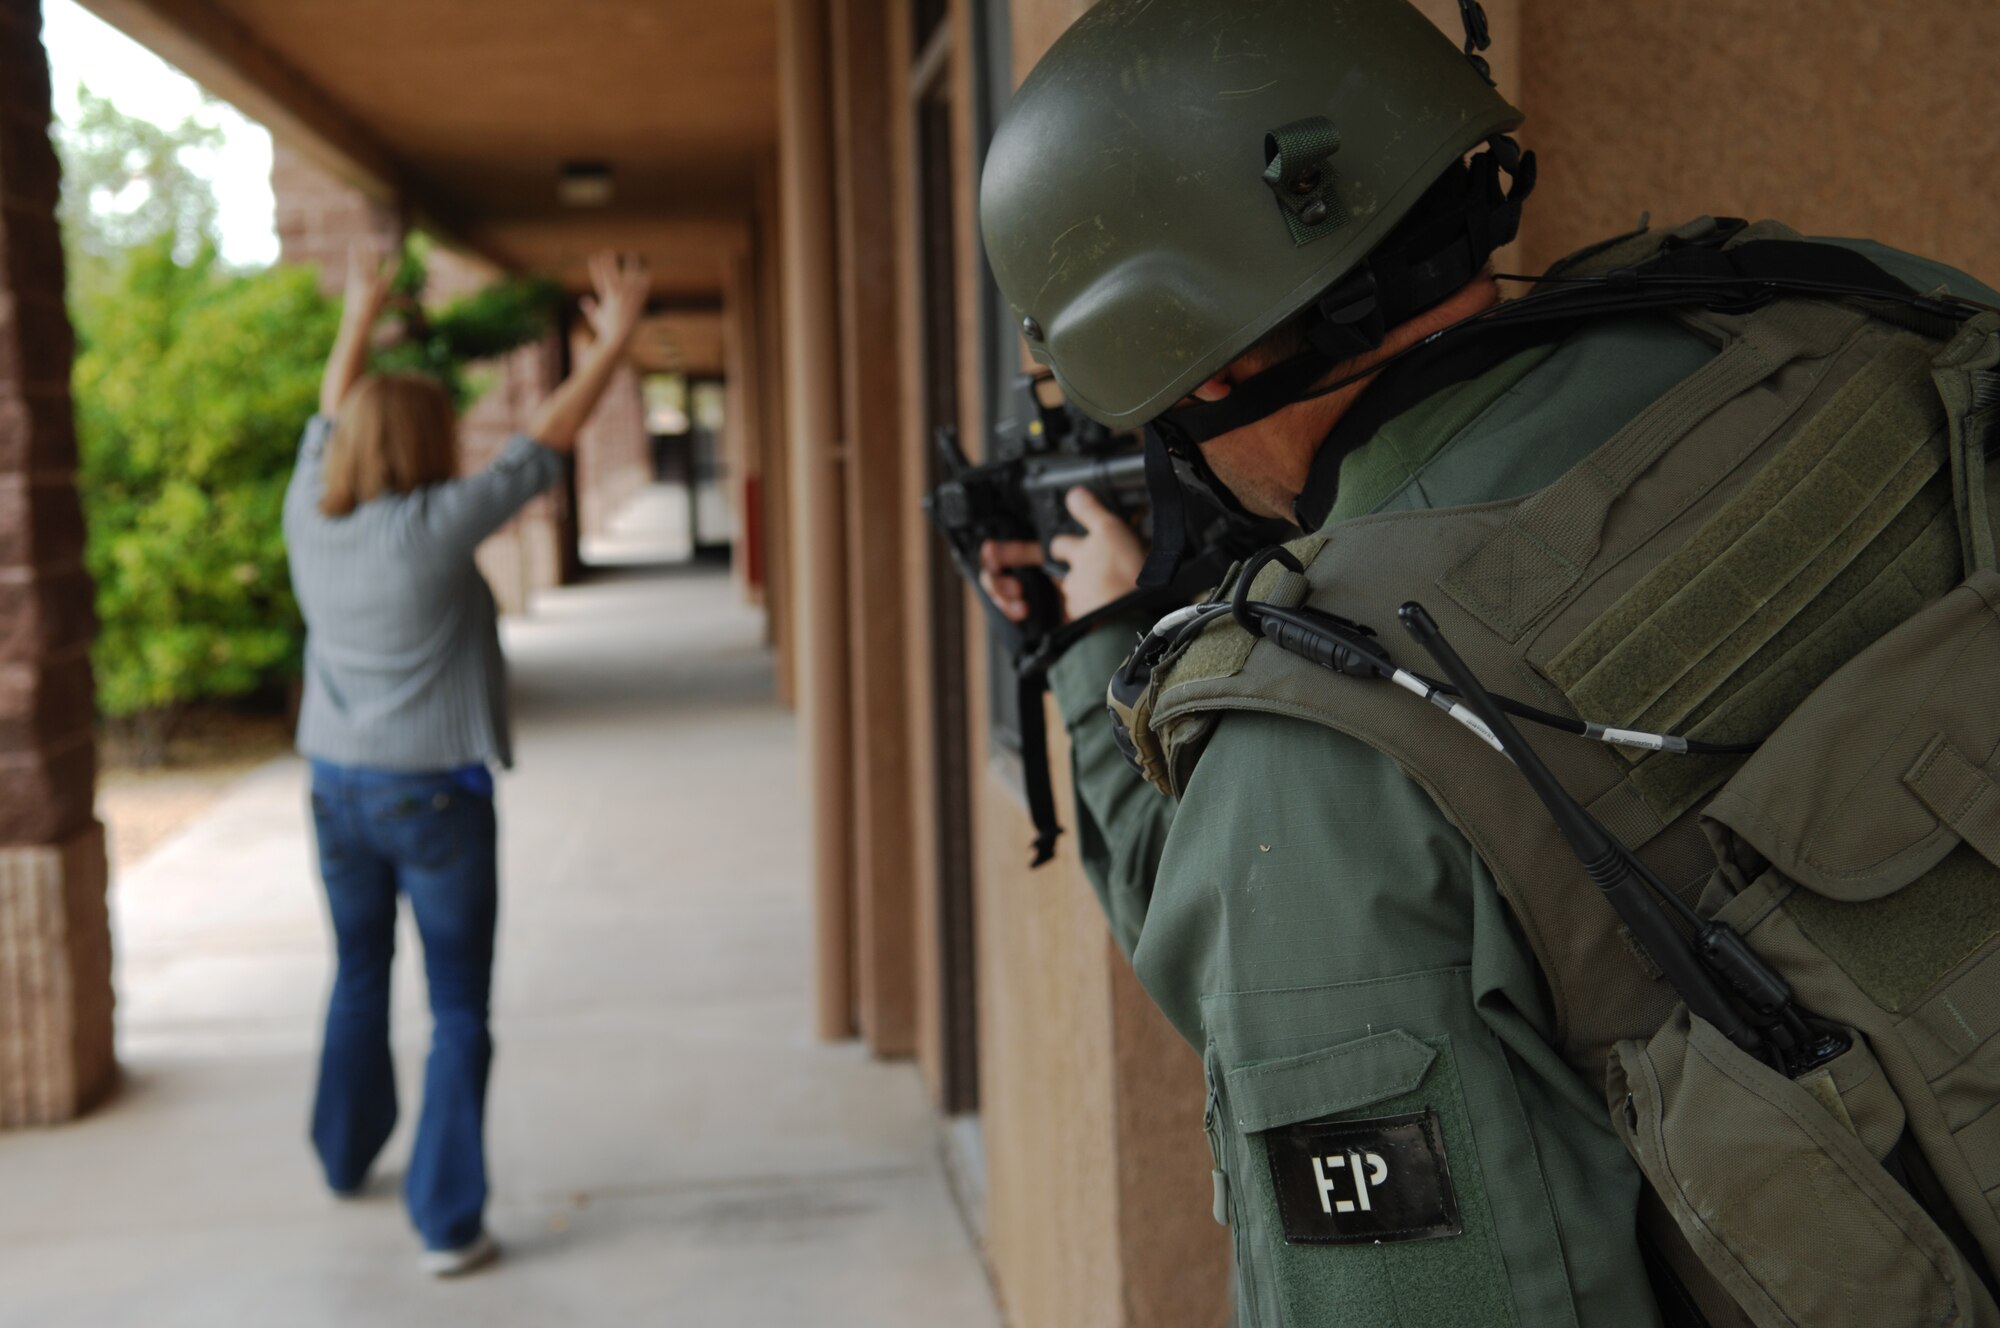 HOLLOMAN AIR FORCE BASE, N.M. -- Members of the El Paso Federal Bureau of Investigation give verbal commands to the wife of the alleged perpetrator during a hostage exercise April 28, 2010, at the base dormitories. The exercise involved 49th SFS Quick Reaction Force members, 49th SFS hostage negotiators; FBI hostage negotiators and FBI Special Weapons and Tactics teams from El Paso, Texas; Las Cruces and Albuquerque, N.M. Within the past year, Holloman security forces and the FBI have begun exercising joint Crisis Negotiation Team training.  This was the first exercise of its kind at Holloman involving both Crisis Negotiation and the SWAT teams. Future exercises are planned and will be larger in scope. (U.S. Air Force photo by Airman 1st Class Joshua Turner / Released)     